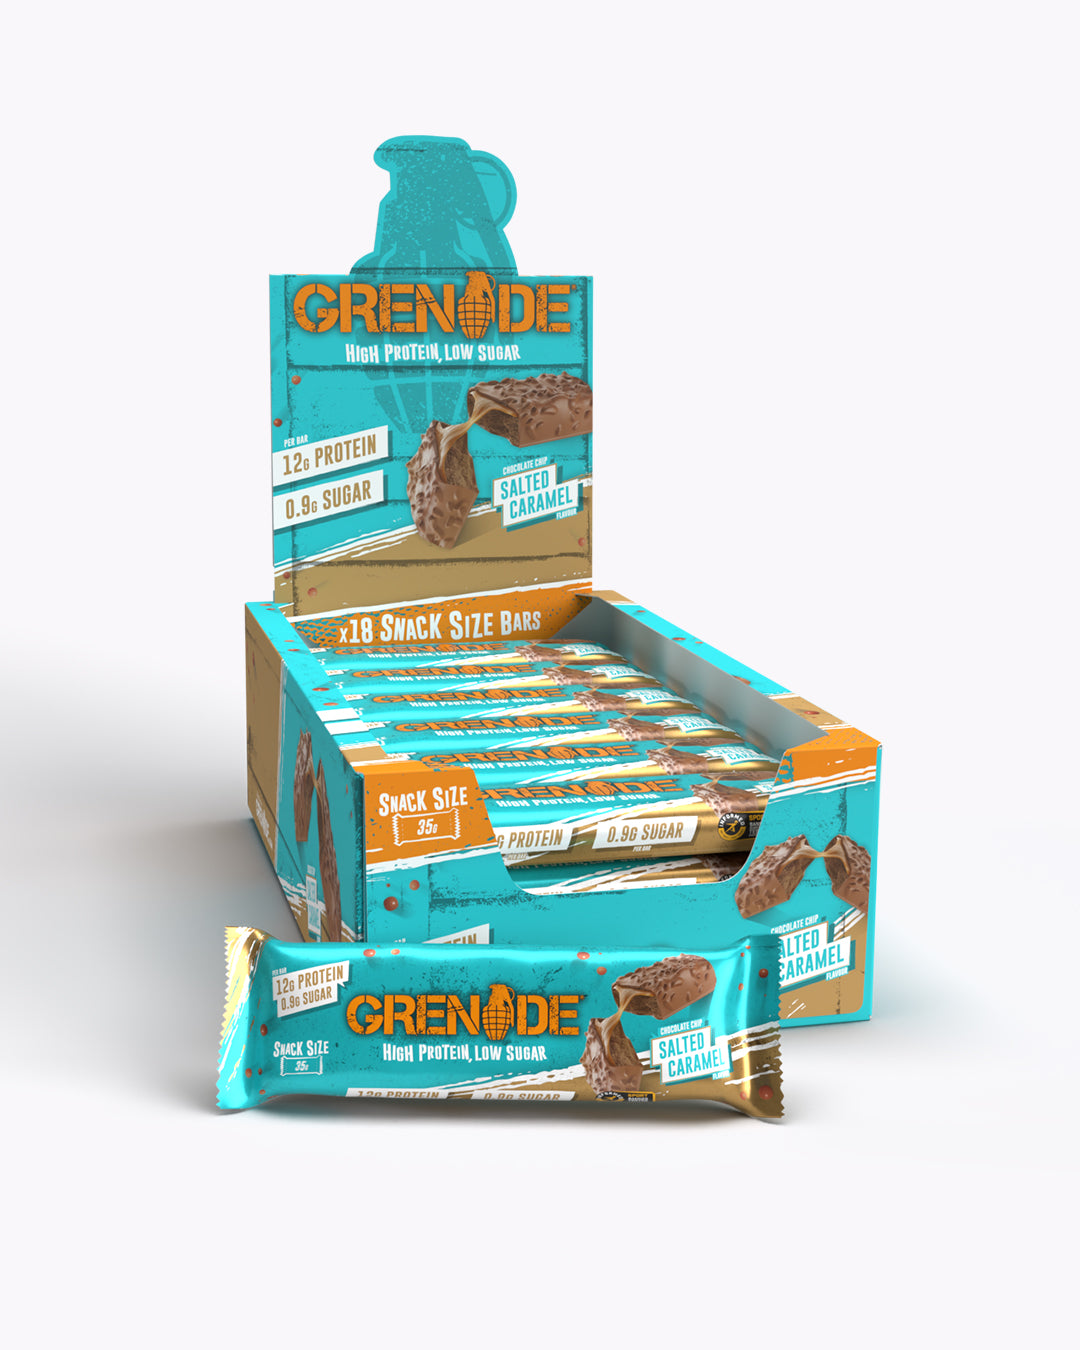 Chocolate Chip Salted Caramel Protein Bar - Snack Size 35g